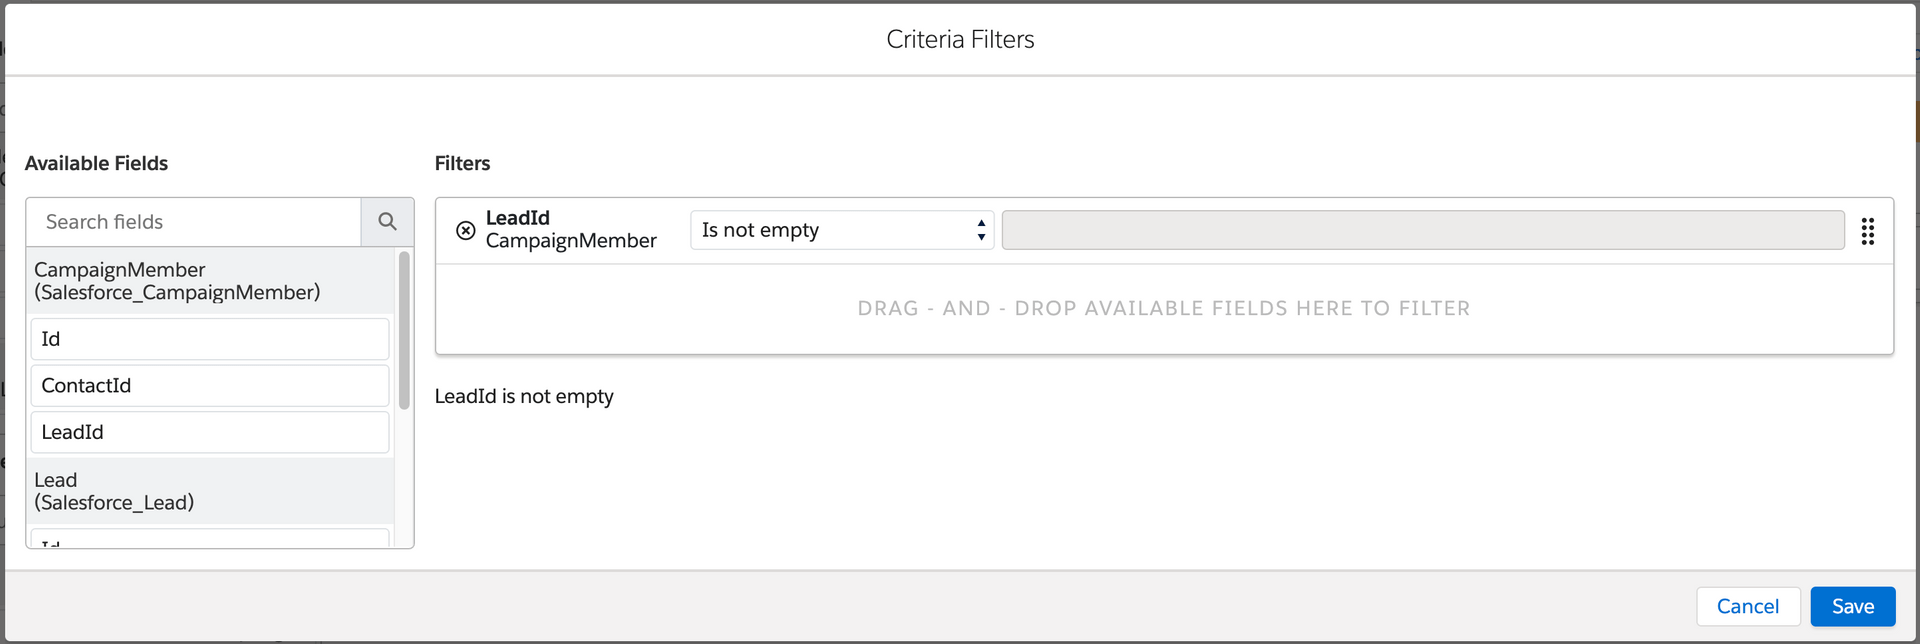 create filters using drag and drop in DESelect